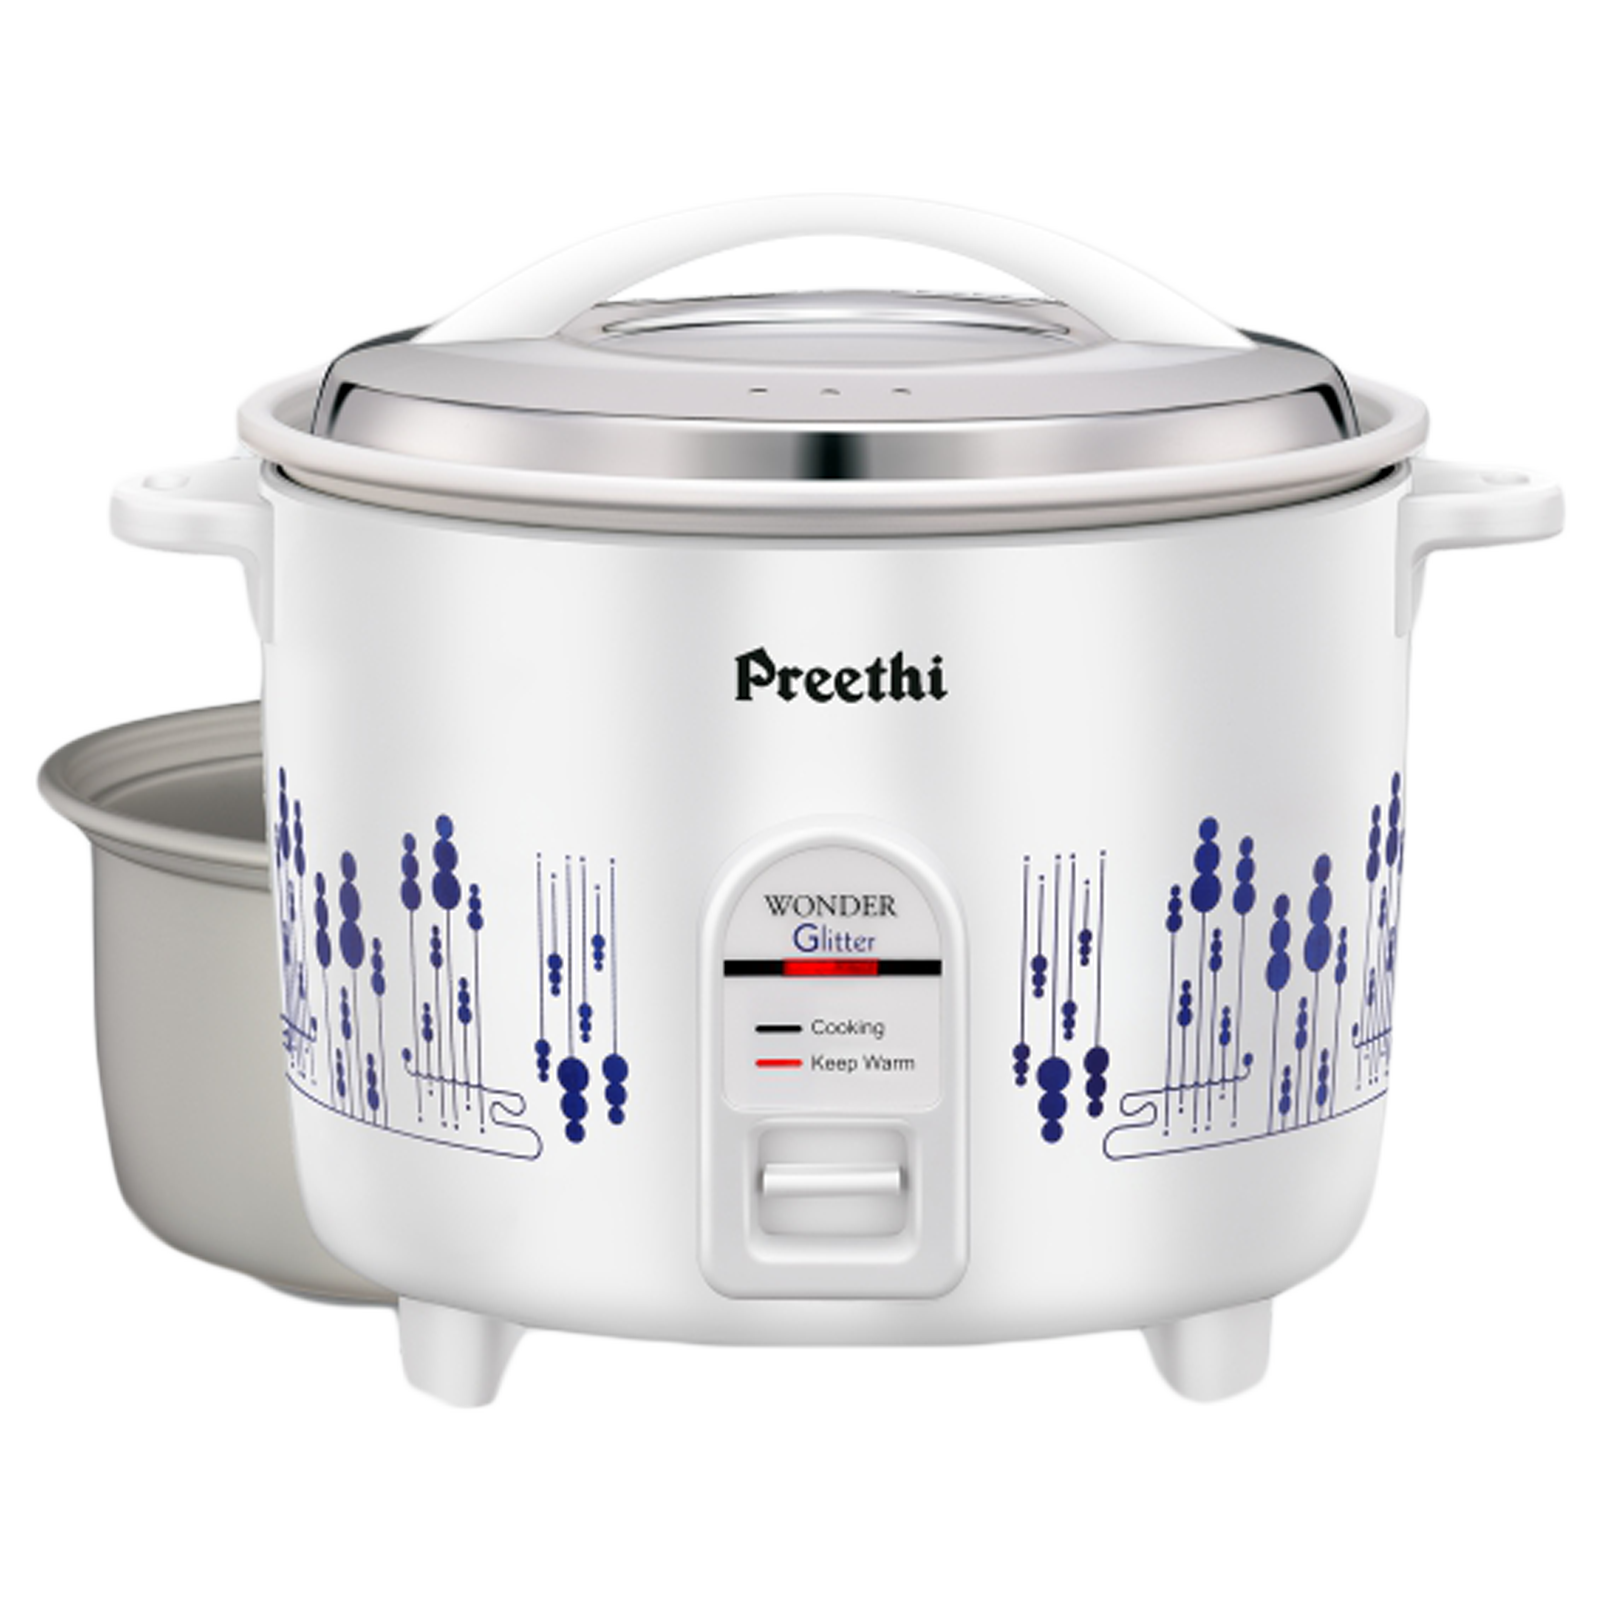 Preethi Glitter 2.2 Litres Electric Rice Cooker (Anodized Aluminium Pan, RC326 DP, White)